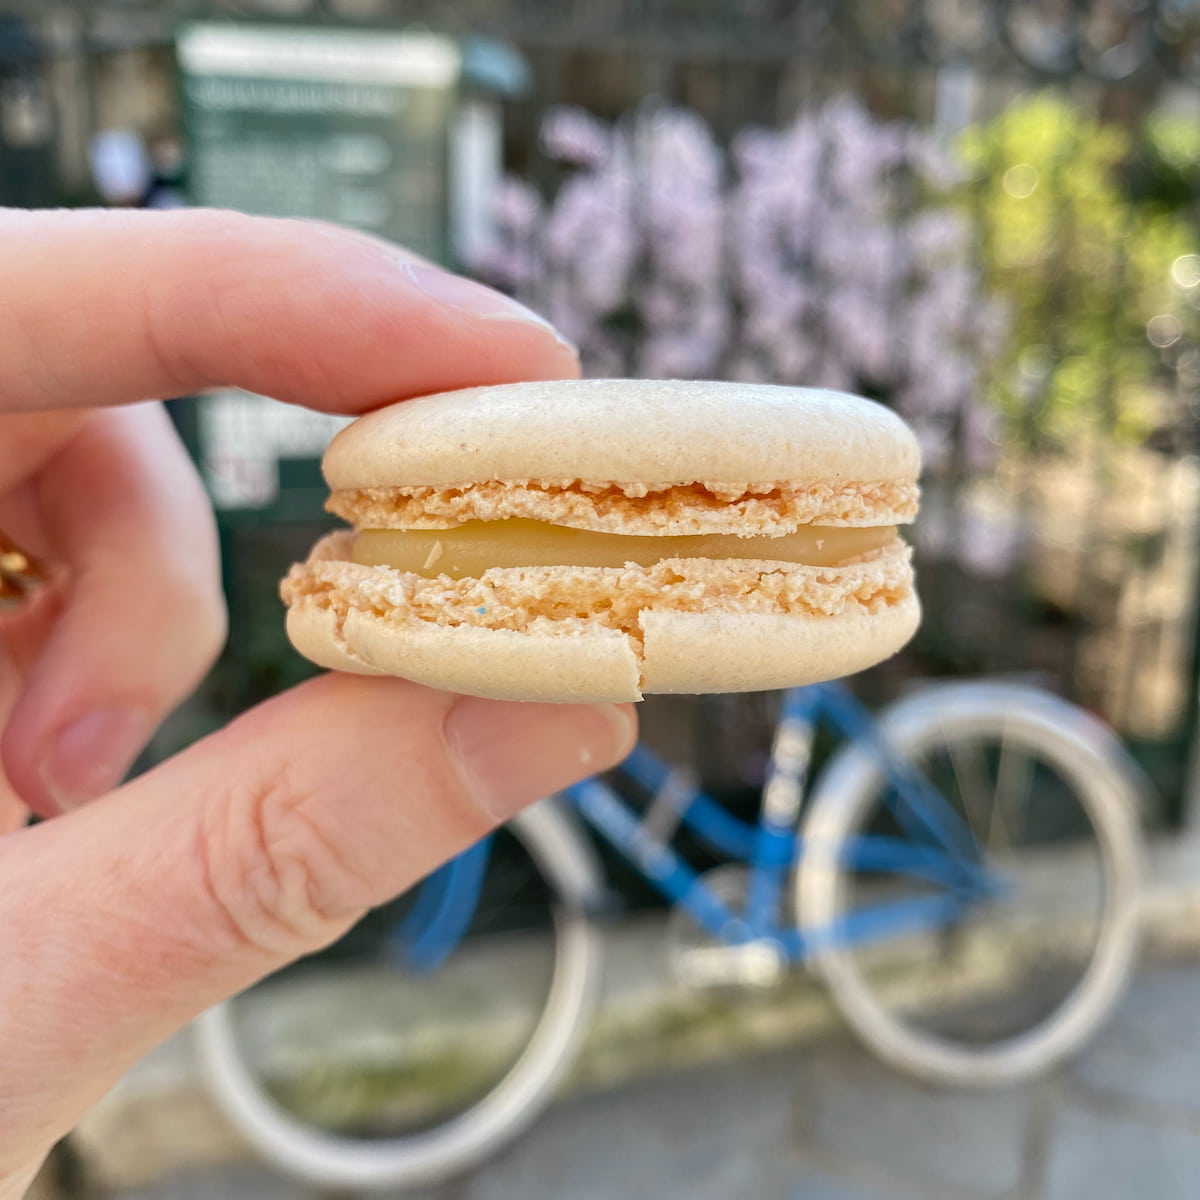 holding a Parisian macaron next to a French bicycle